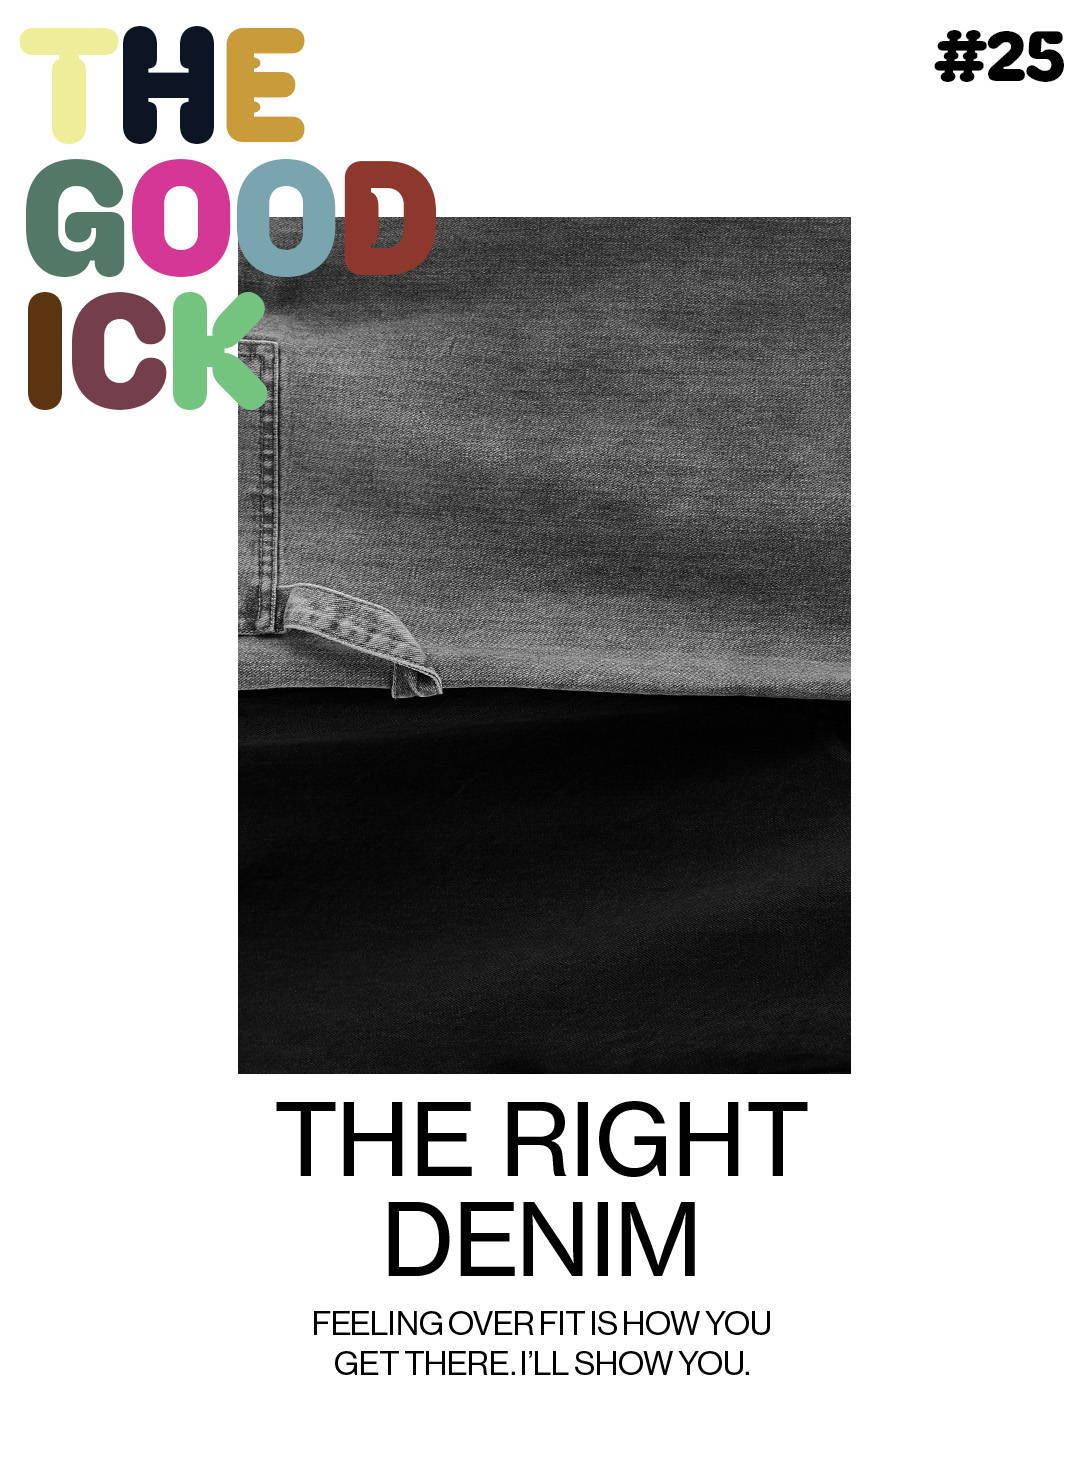 The Good Ick #25: The Right Denim